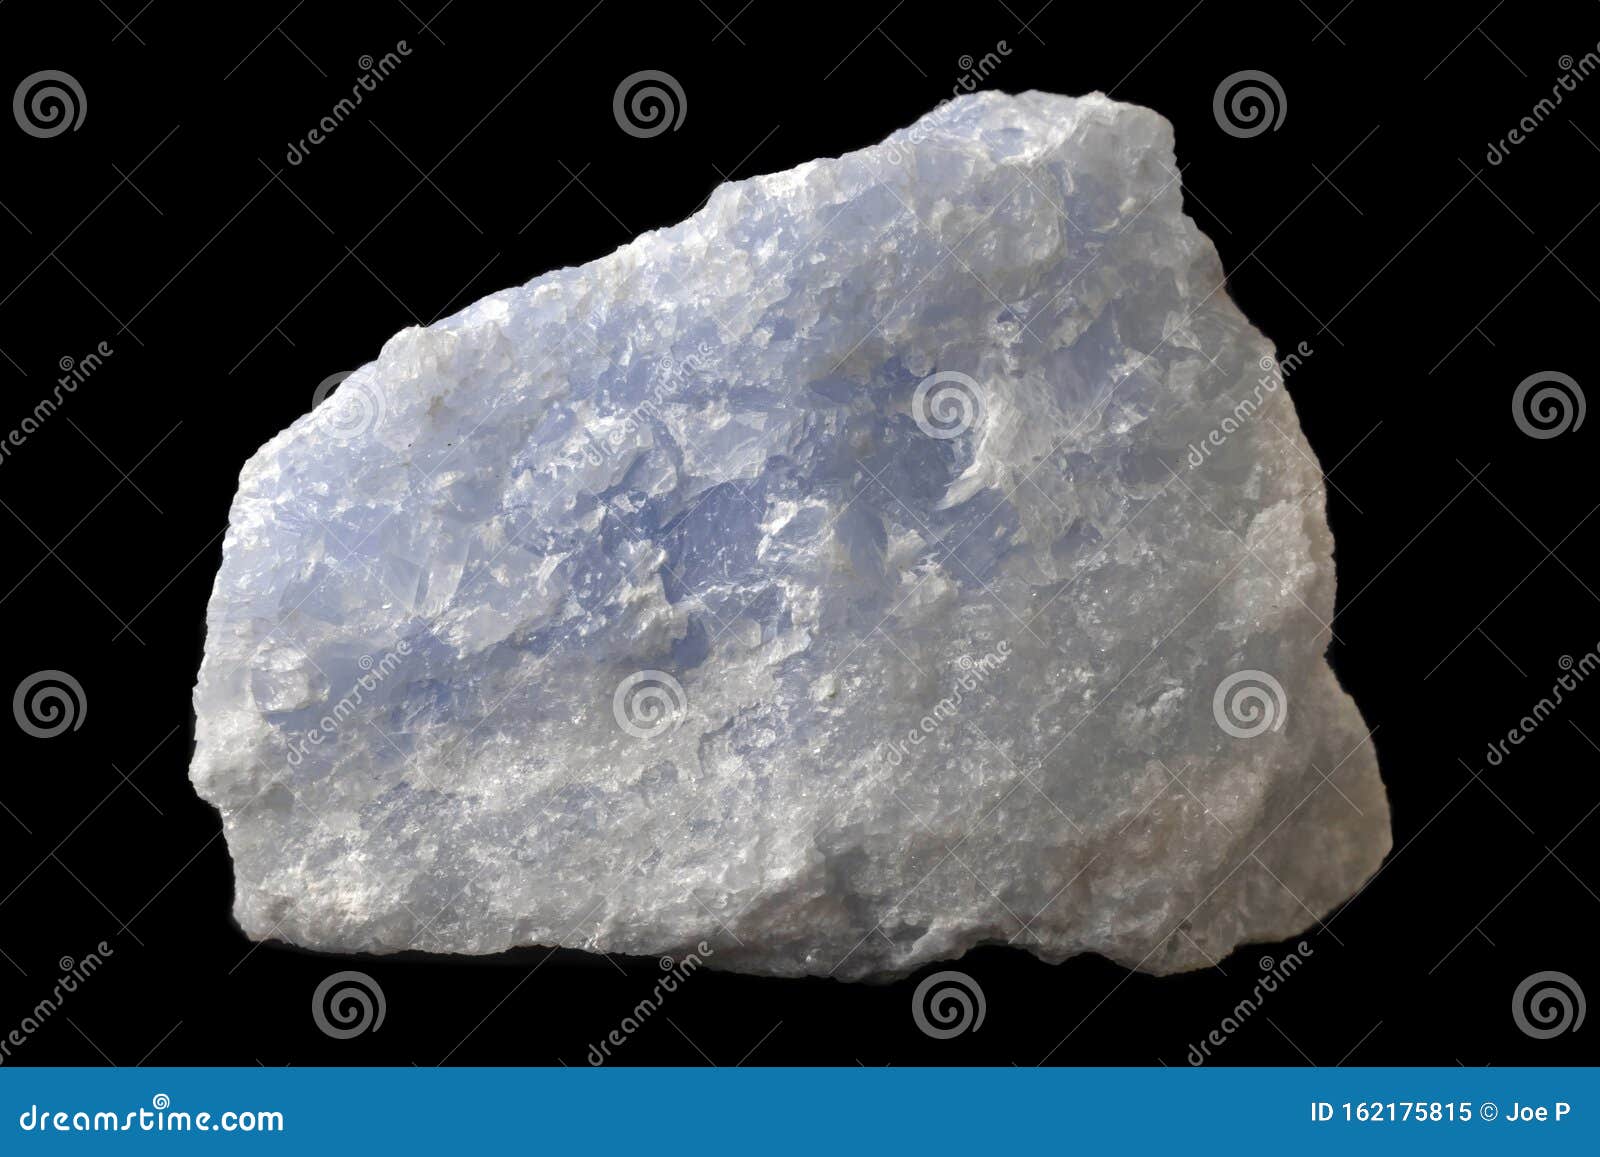 rock of blue calcite mineral from brazil  on a pure black background